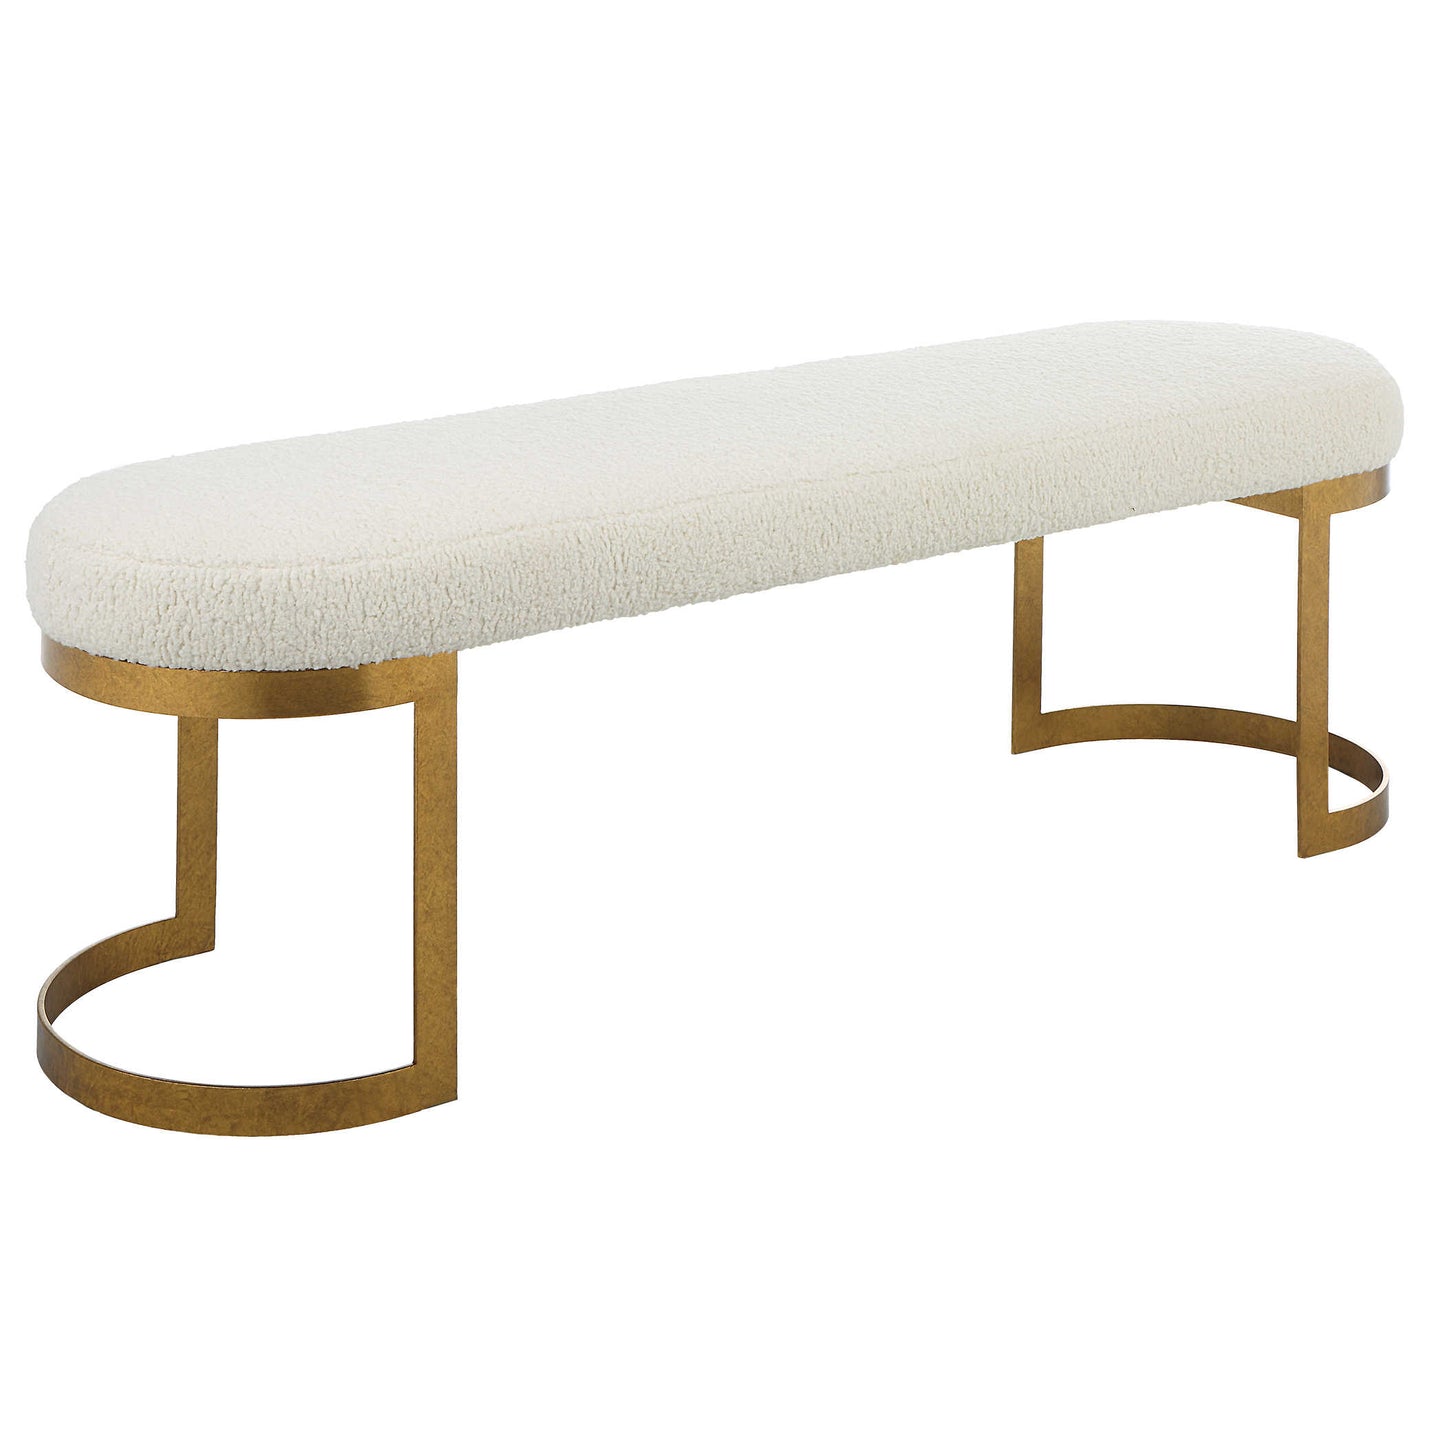 Infinity gold bench